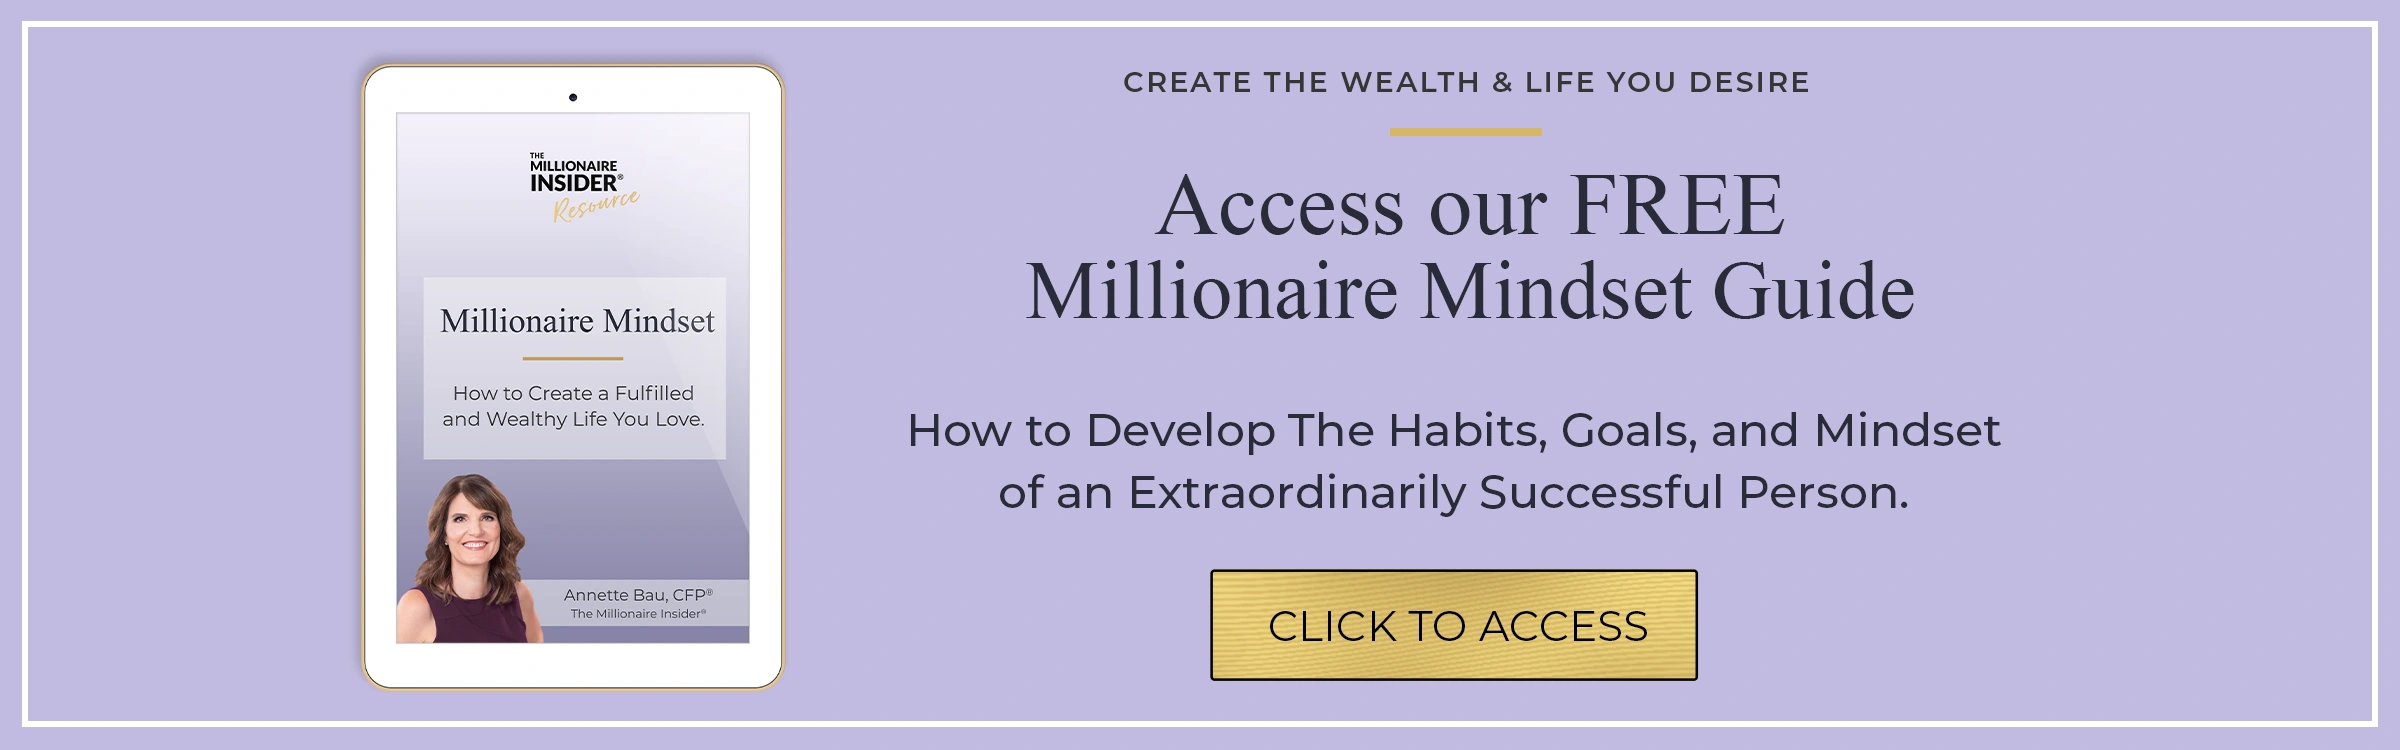 the millionaire mindset guide